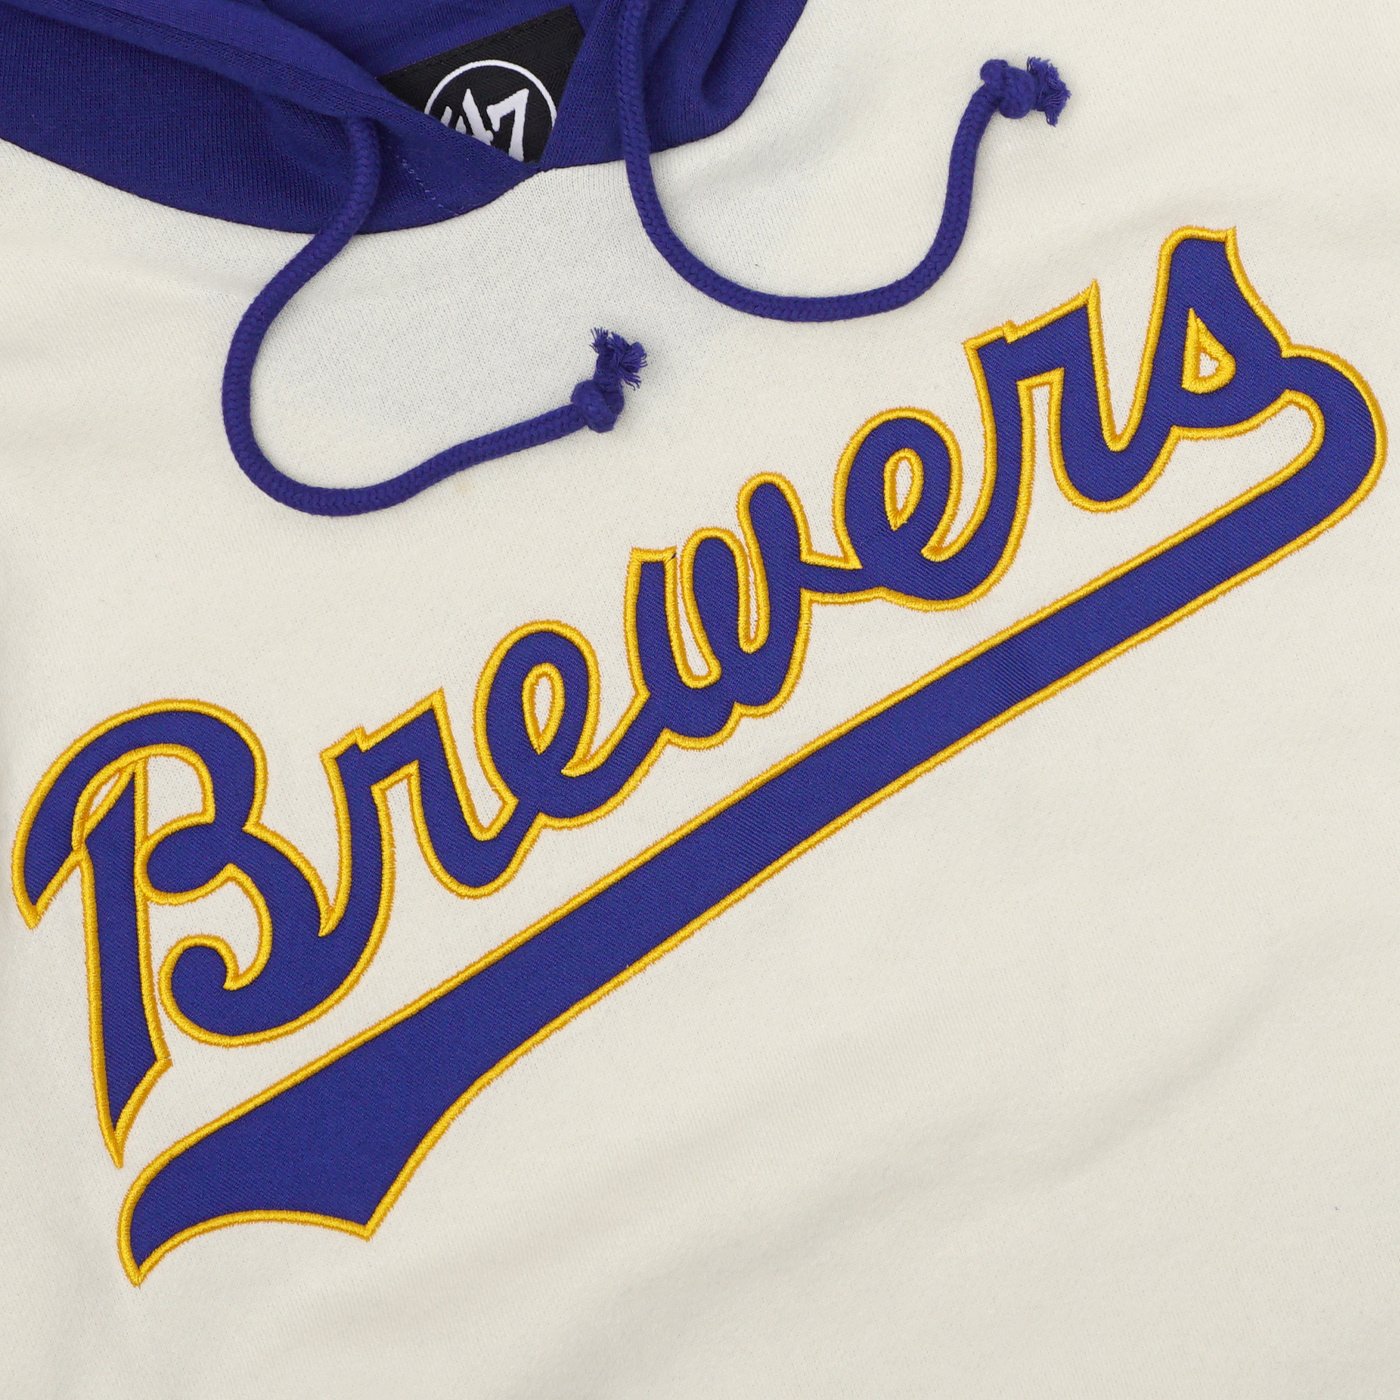 Milwaukee Brewers Majestic Youth City Twill Hoodie - Navy